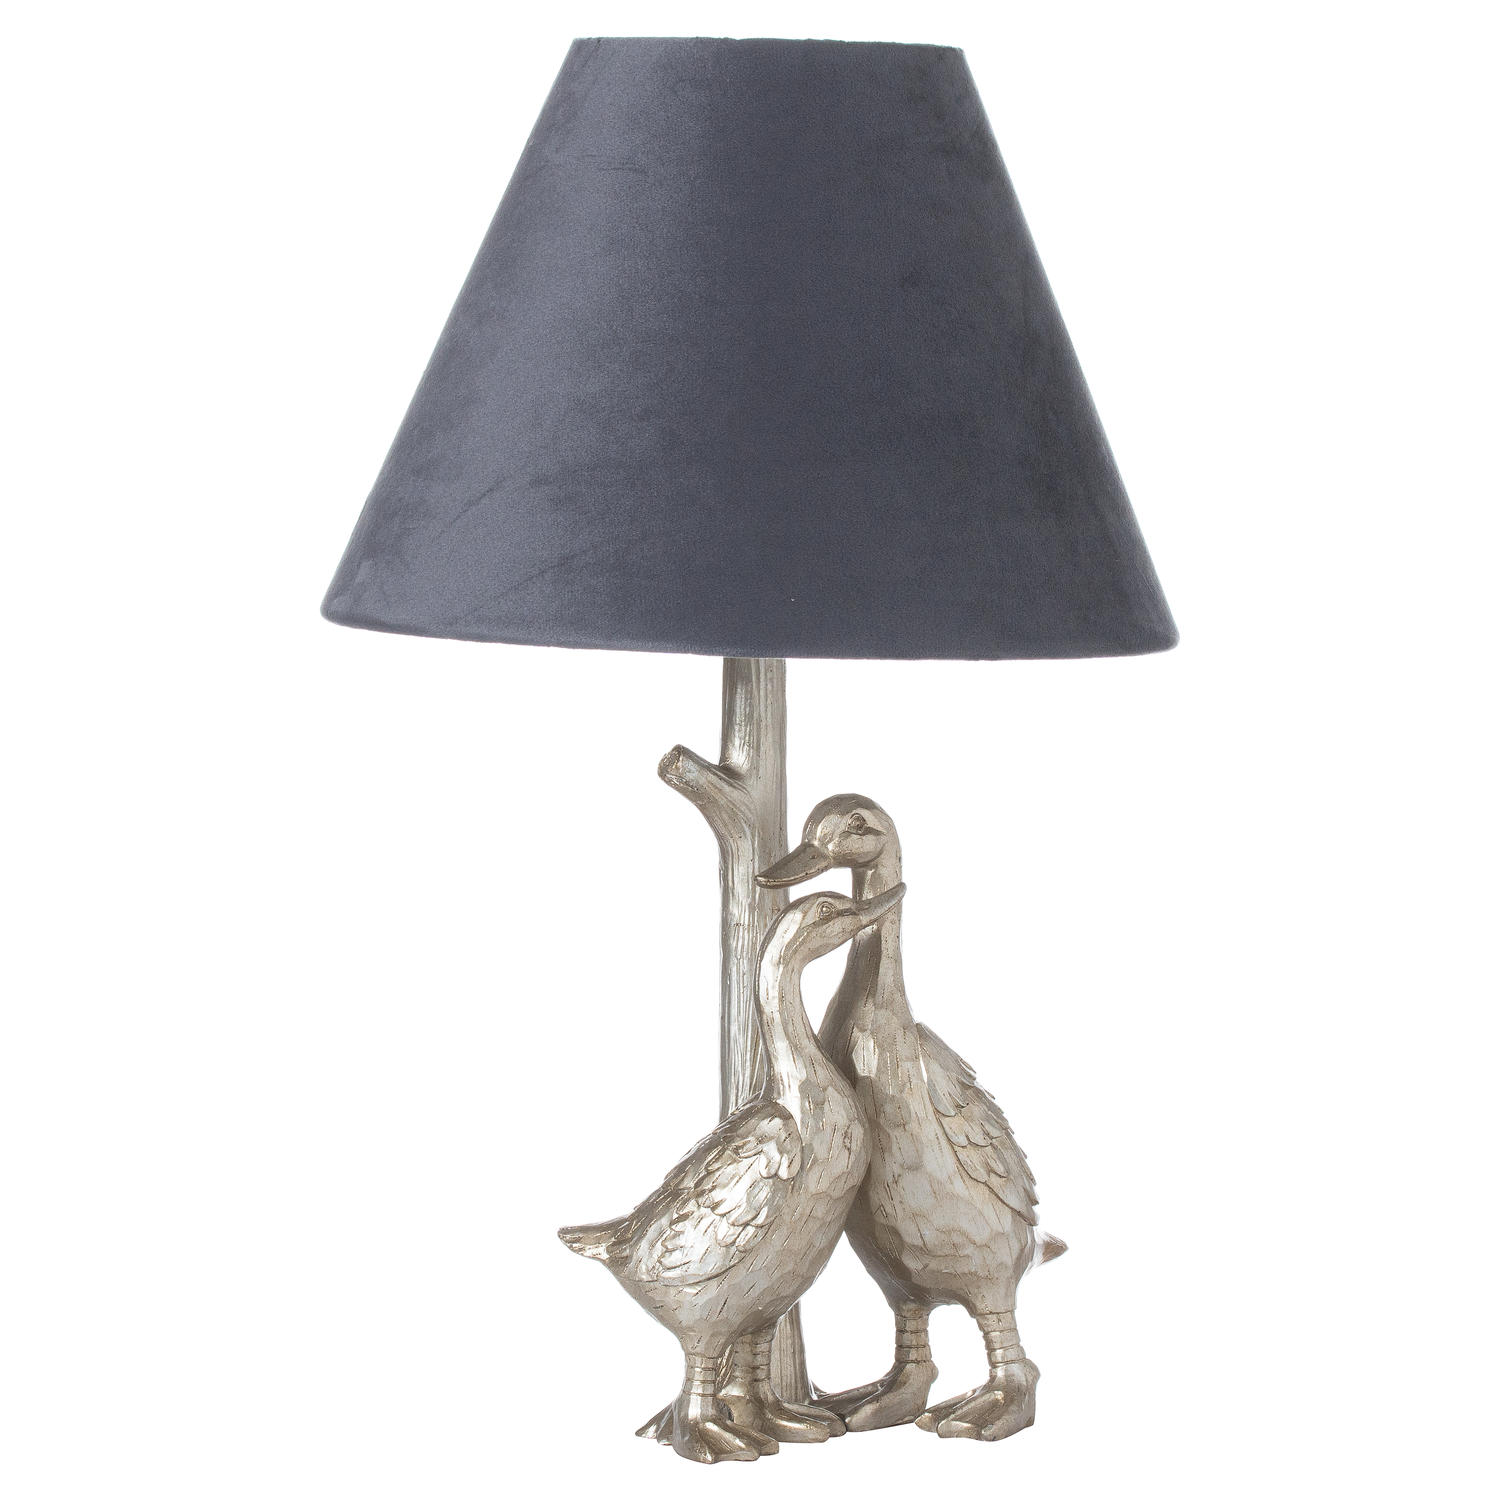 Silver Pair Of Ducks Table Lamps With Velvet Shade - Image 1